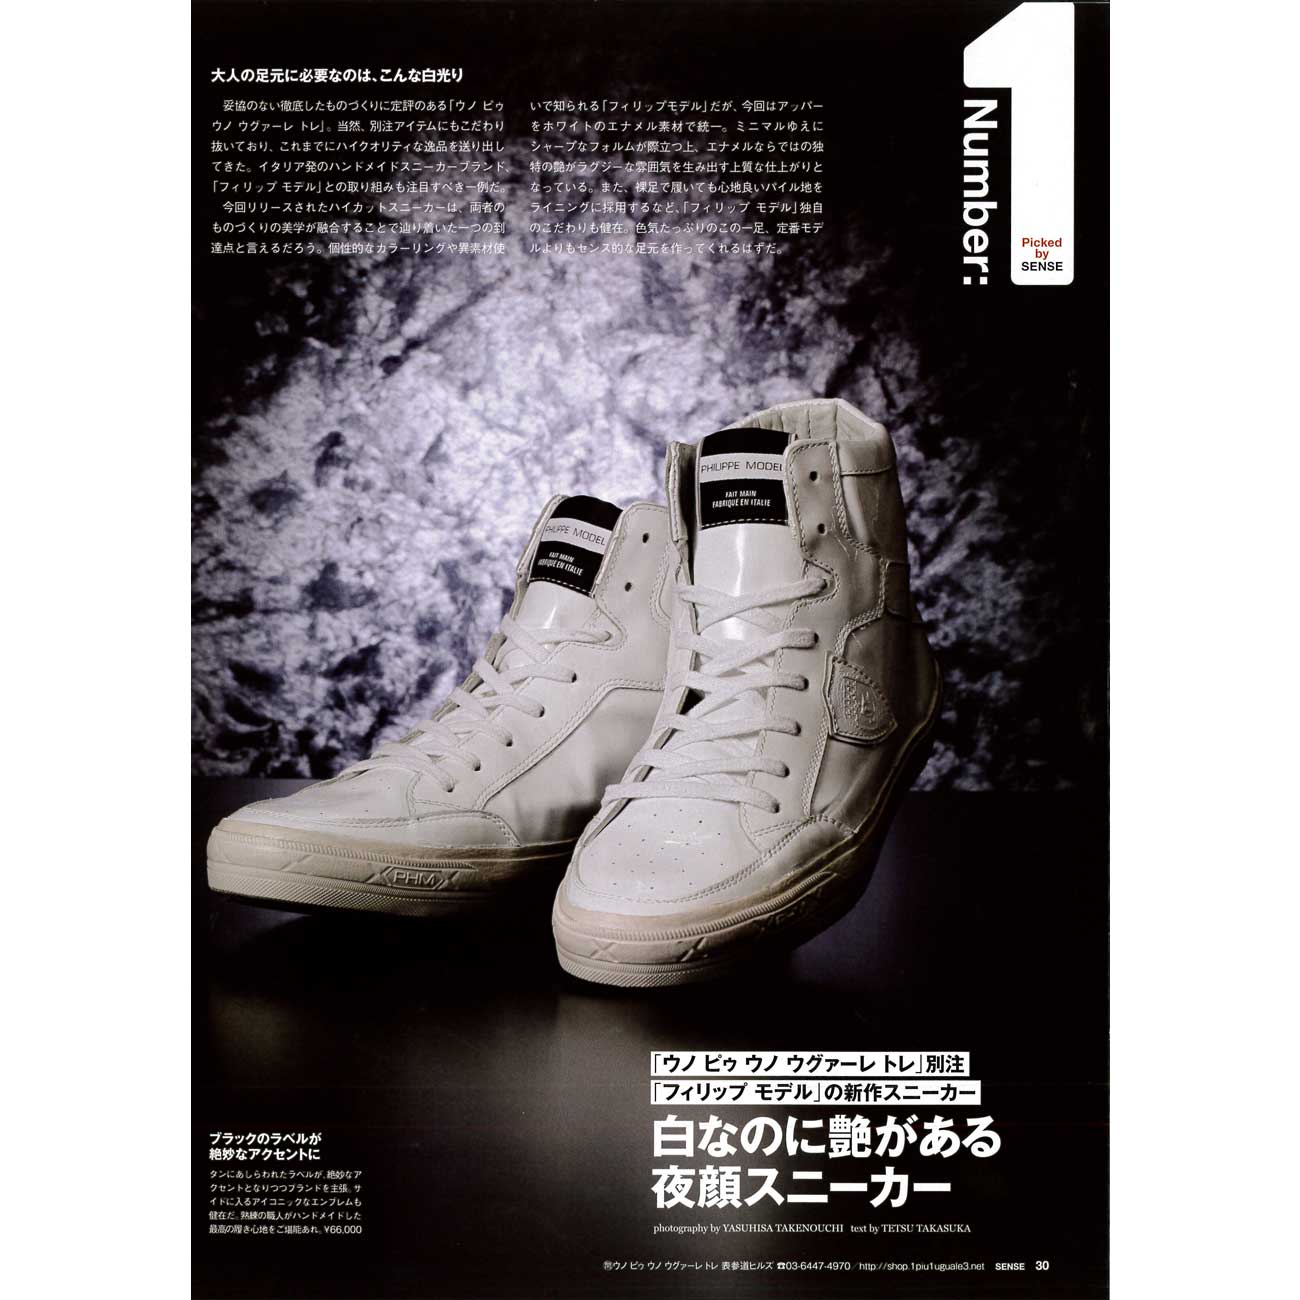 113 PHILIPPE MODEL 7 Hi [flagship store limited]